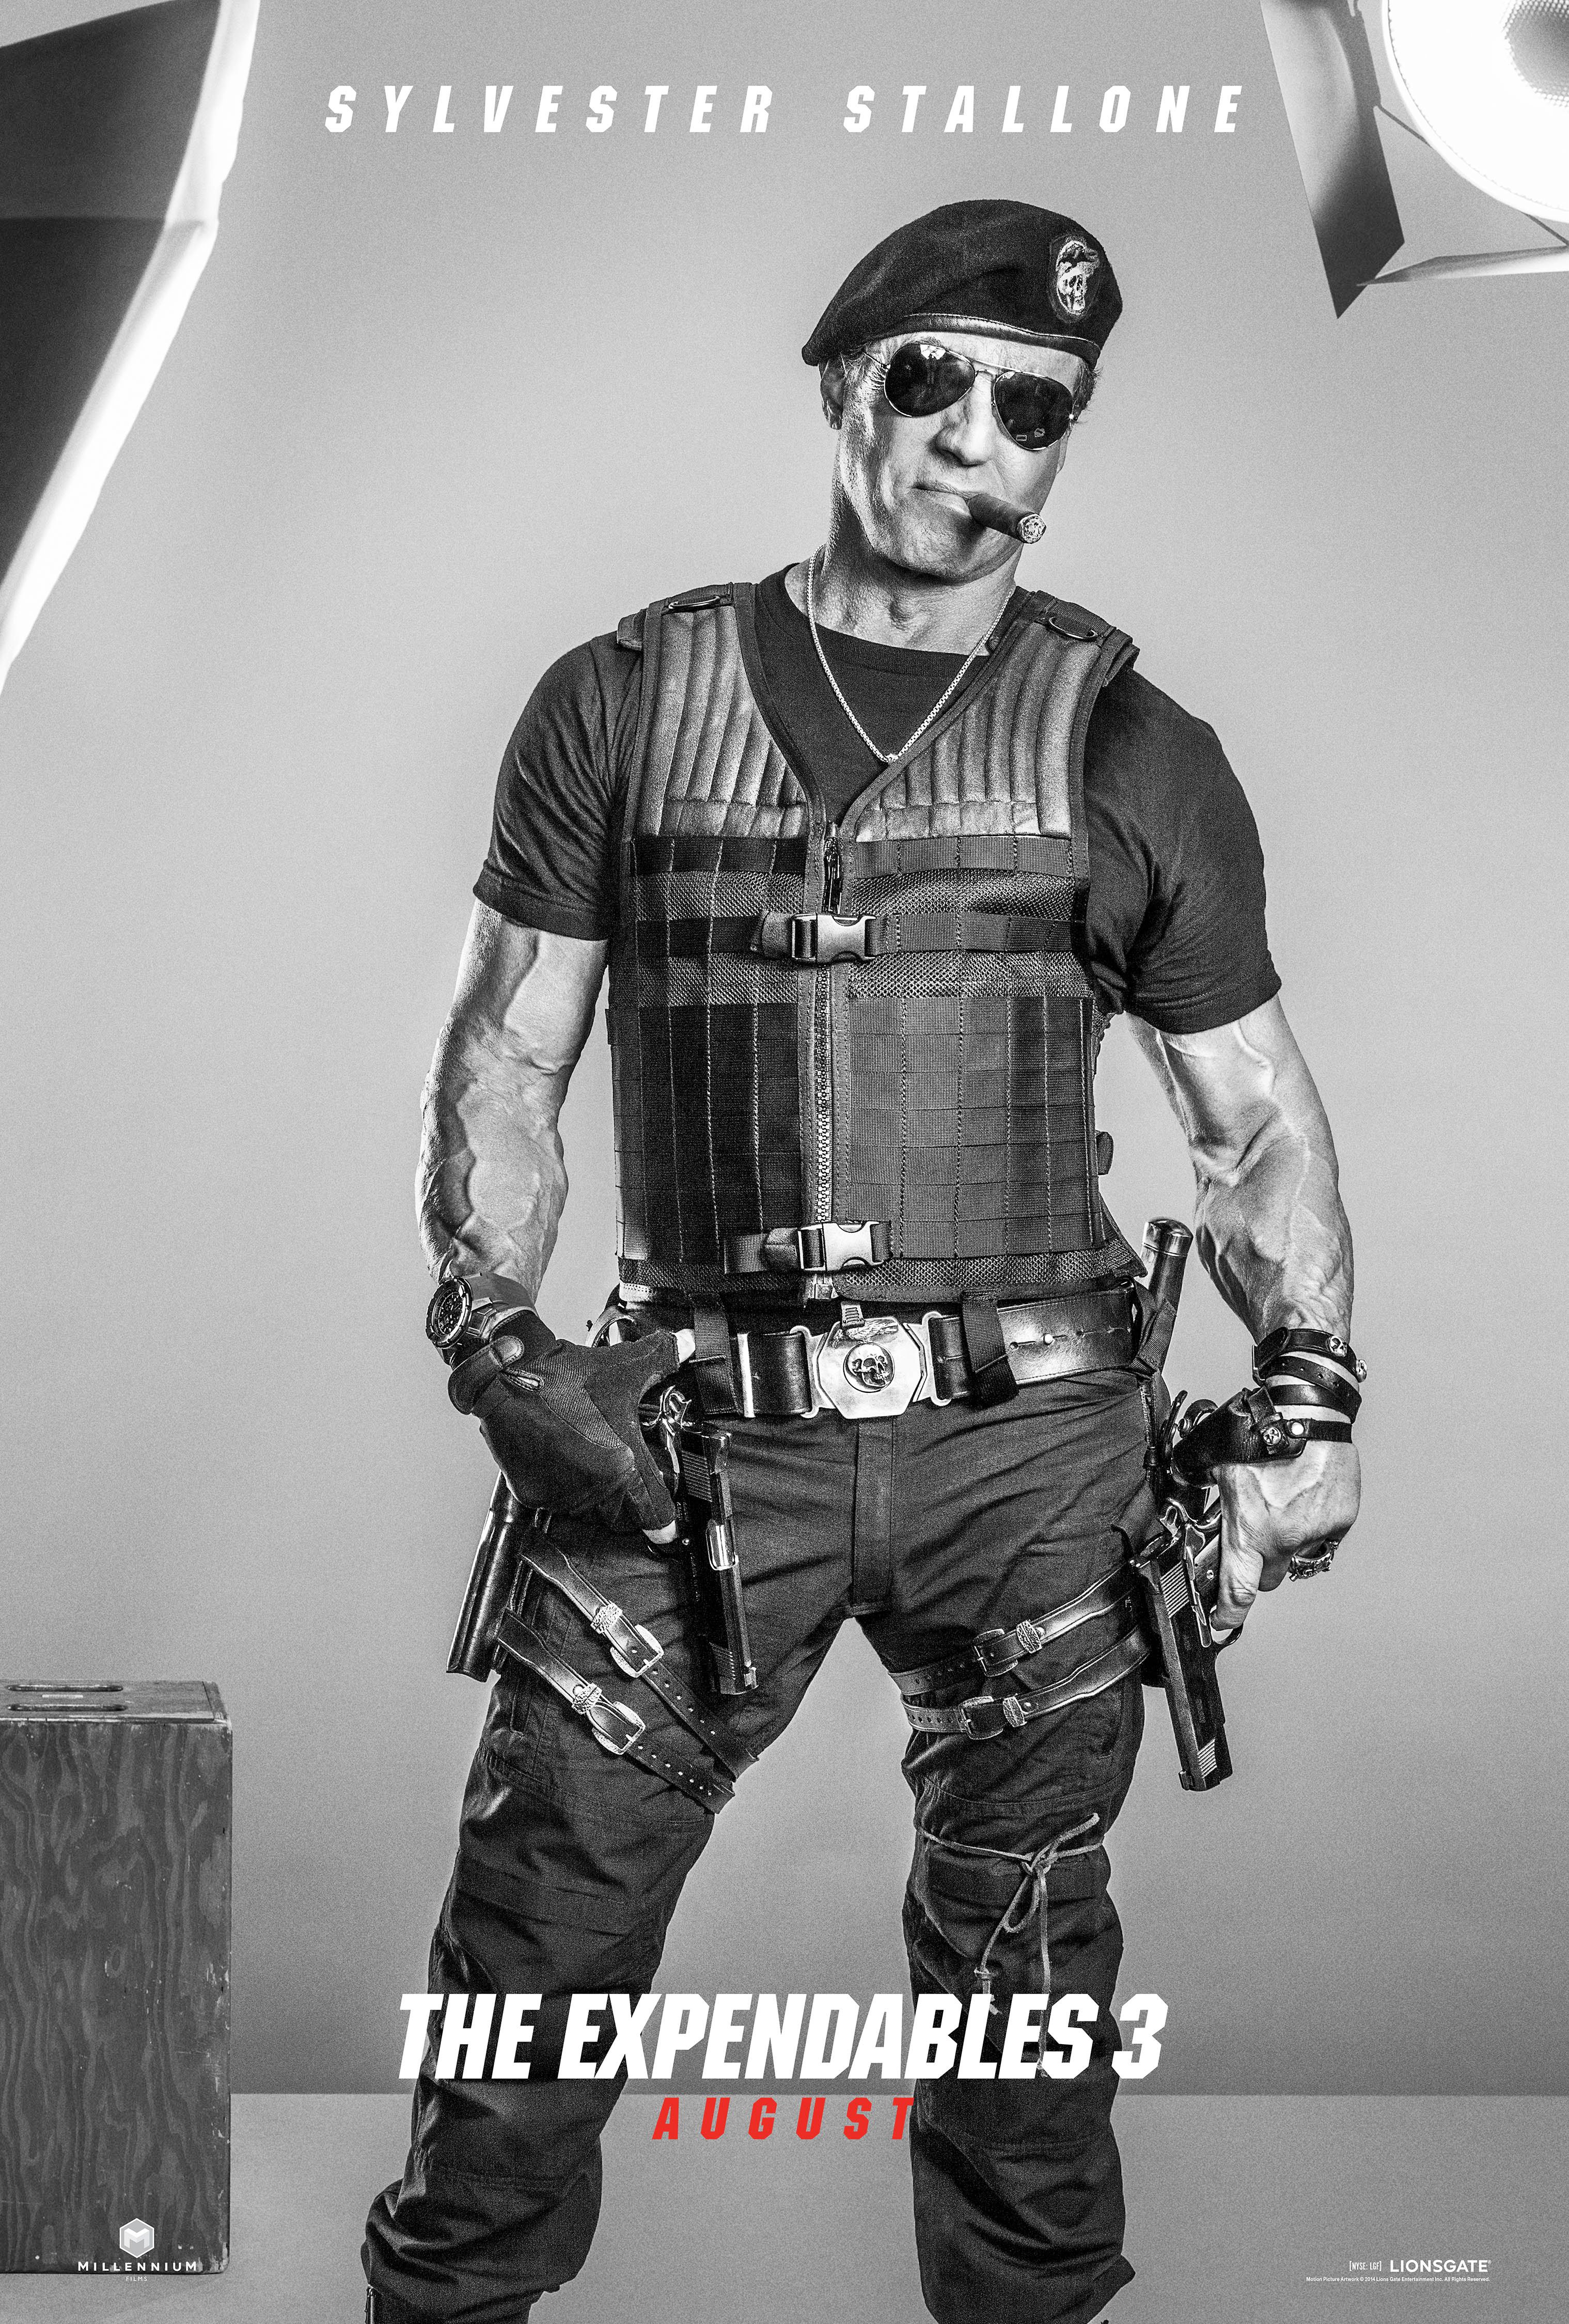 New EXPENDABLES 3 Image Features Sylvester Stallone, Wesley Snipes | Collider3038 x 4500